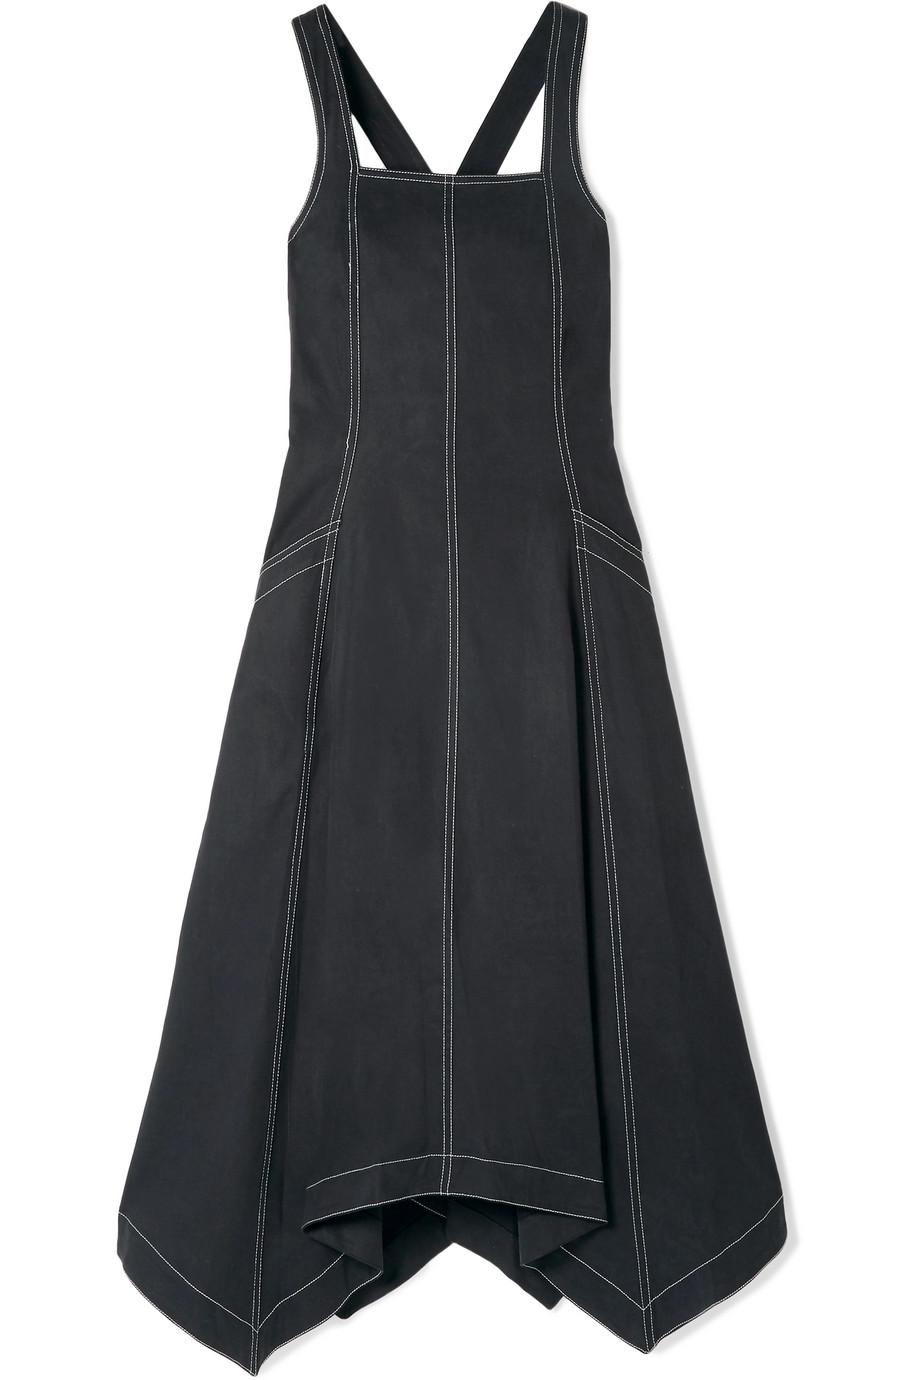 black leather overall dress